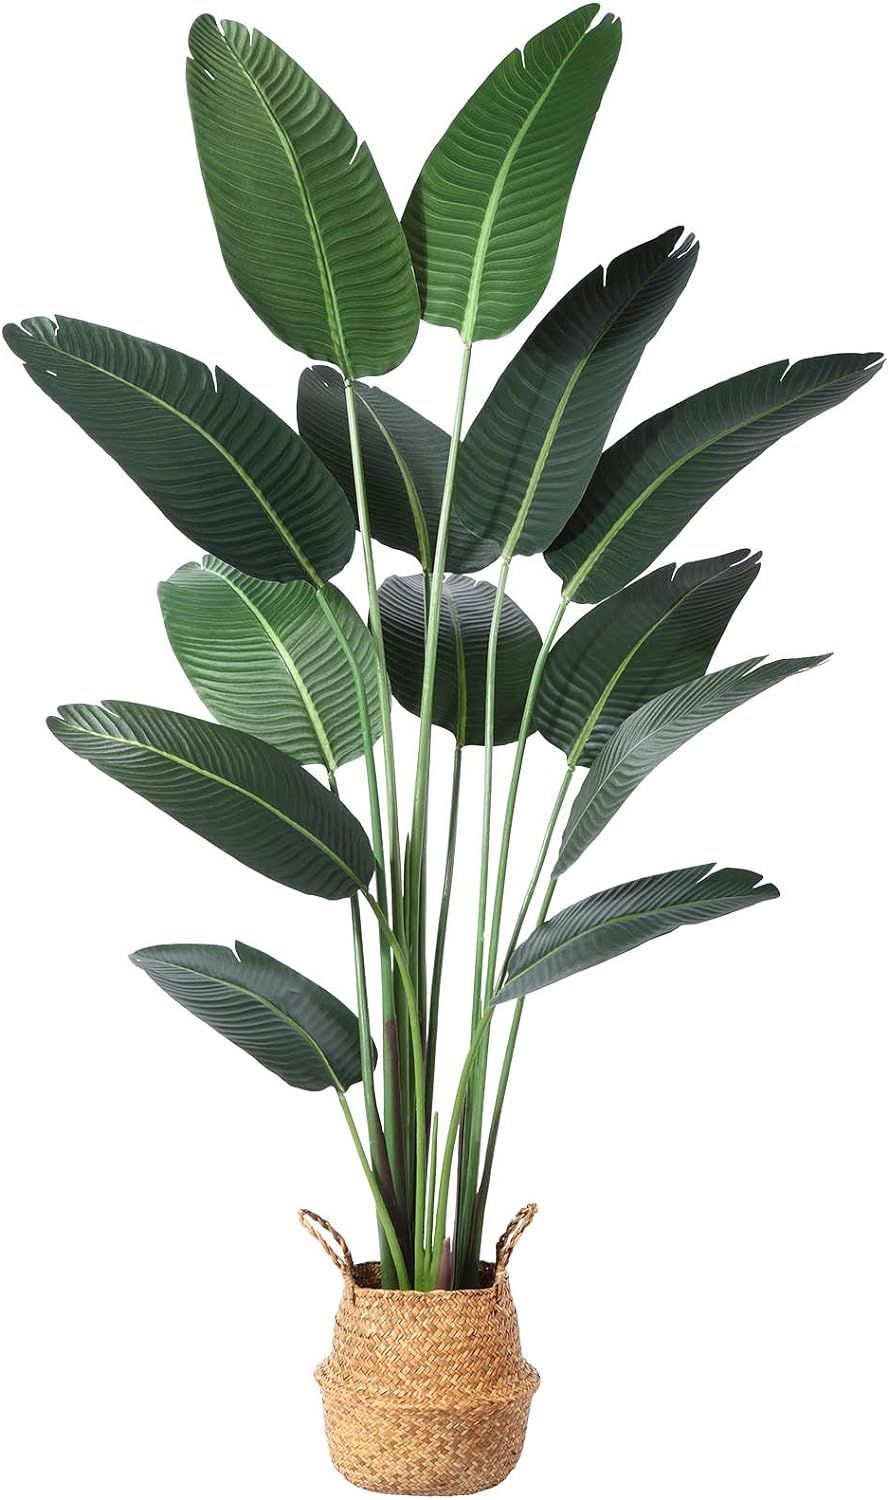 Artificial Bird of Paradise Plants 6 Ft Fake Tropical Palm Tree with 13 Trunks in Pot and Woven S... | Amazon (US)